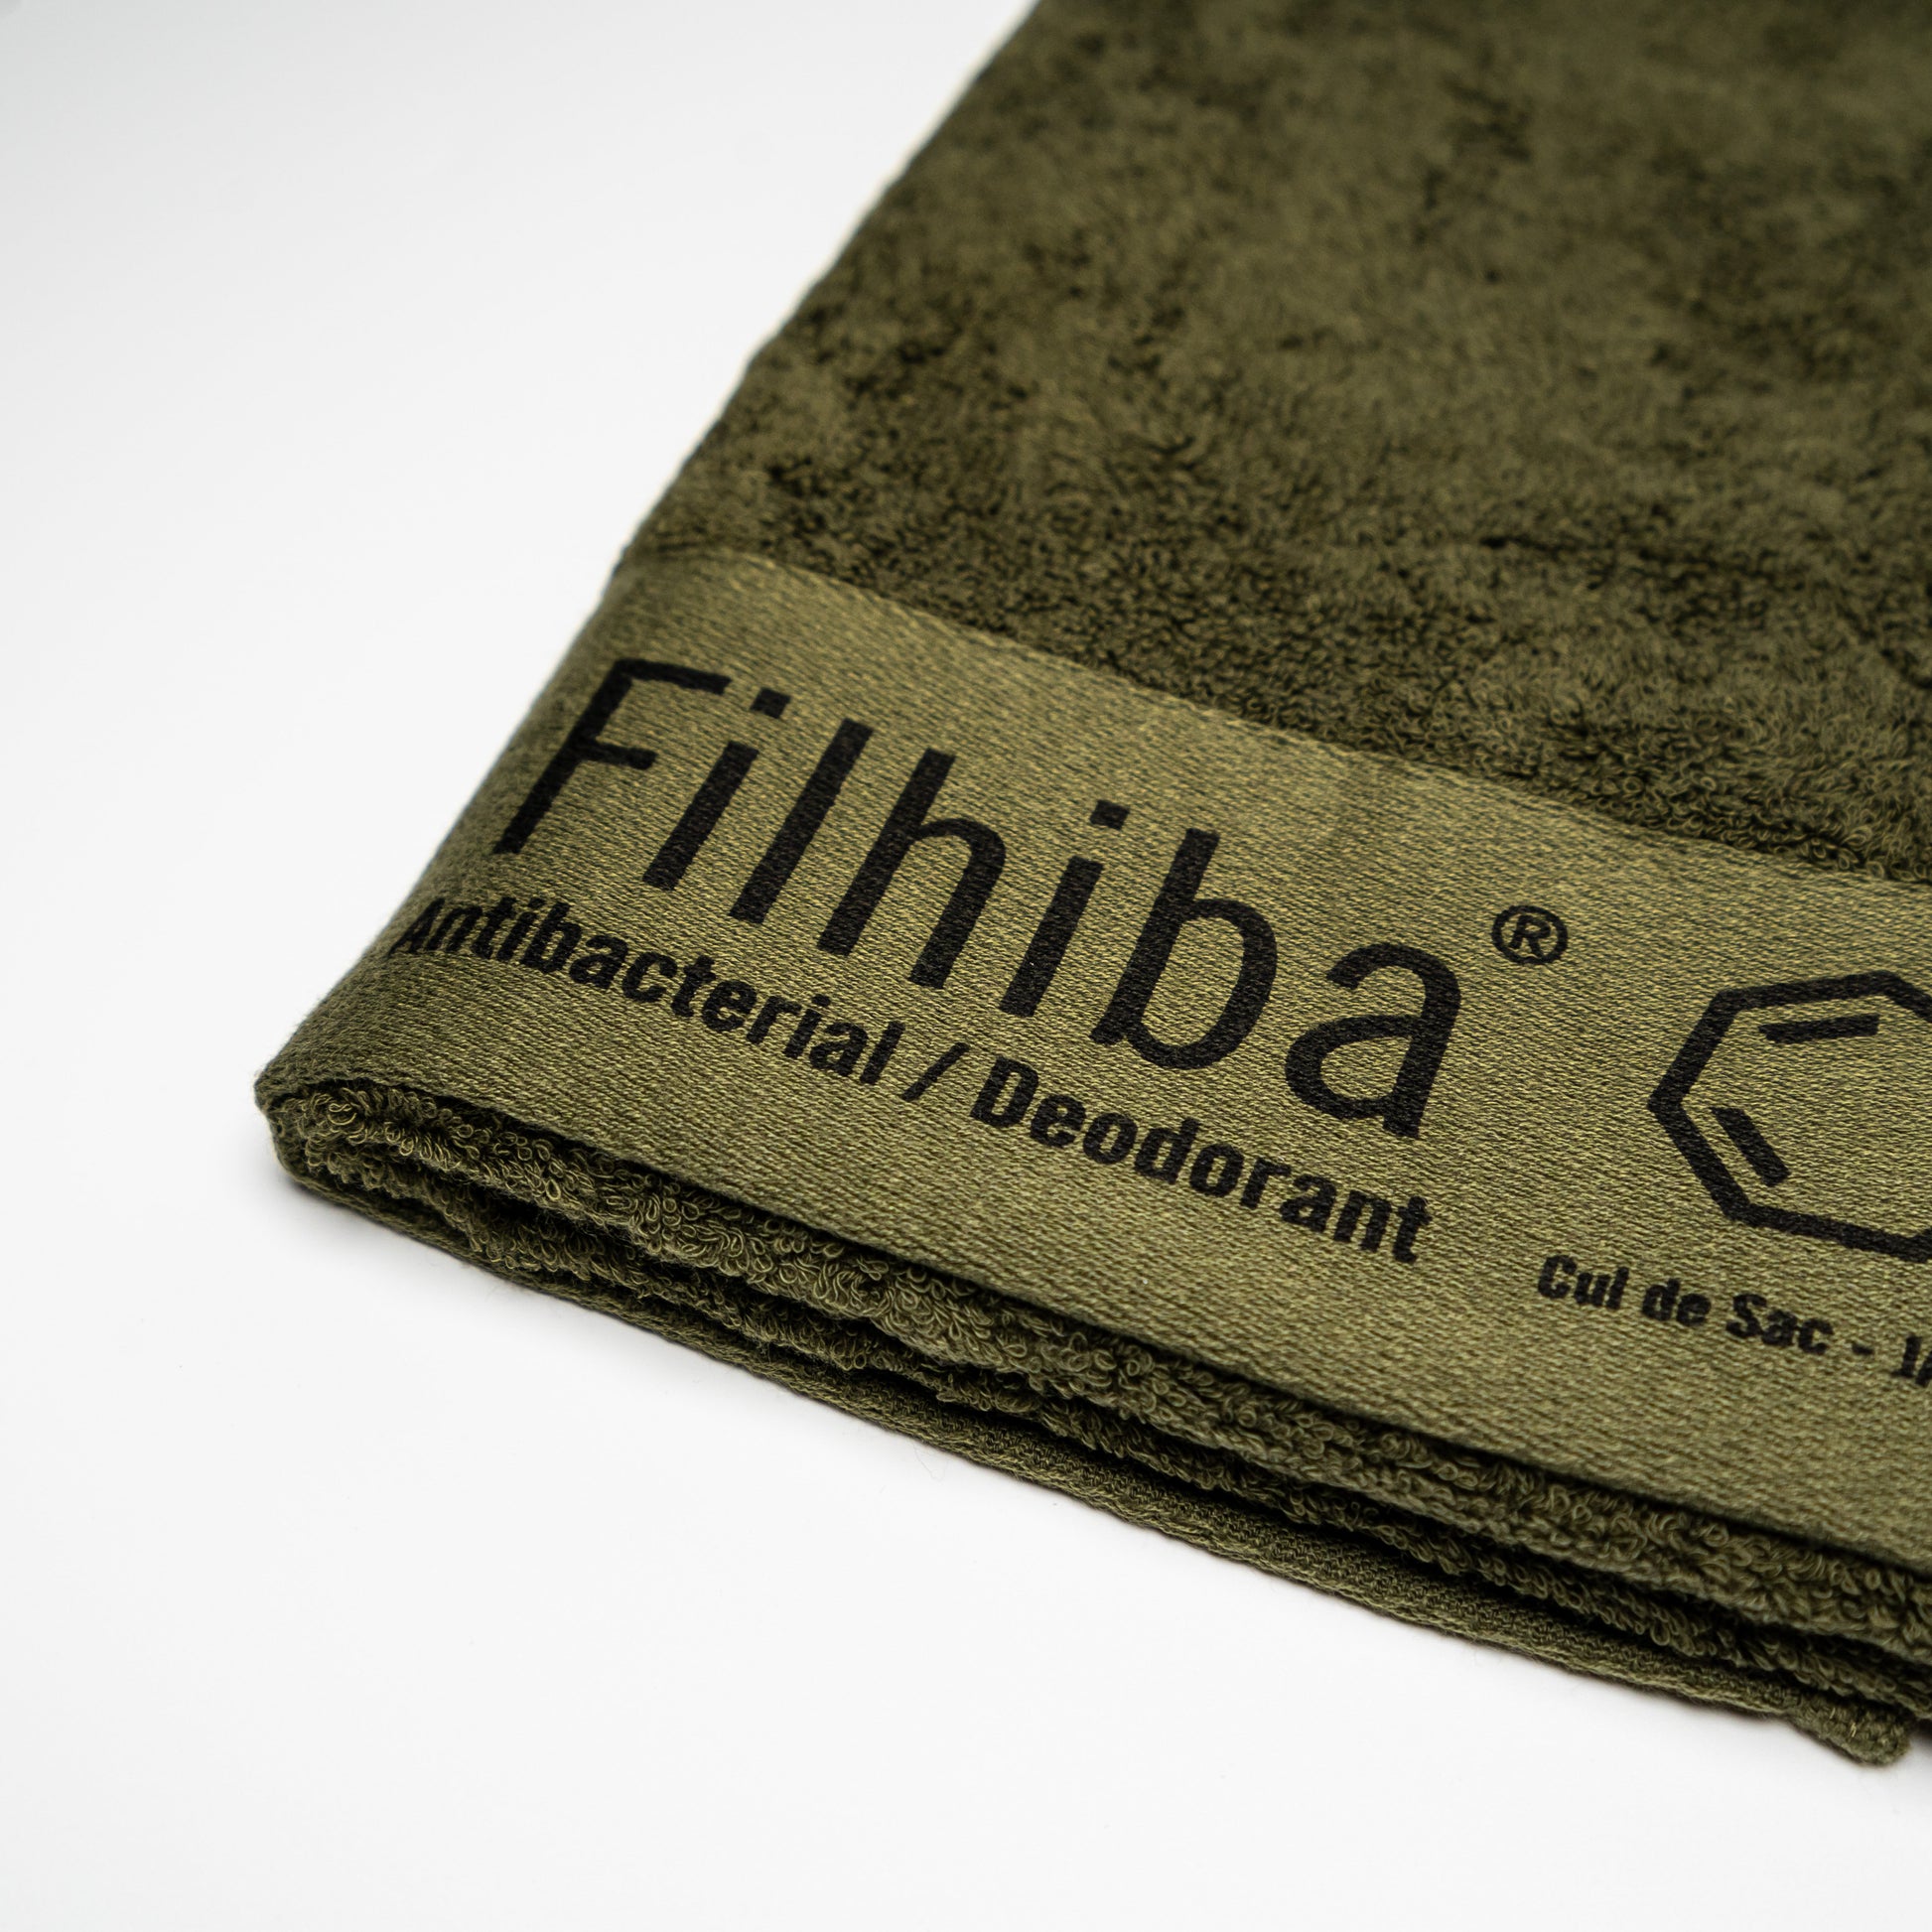 A close up of a Green Filhiba face towel on a white background